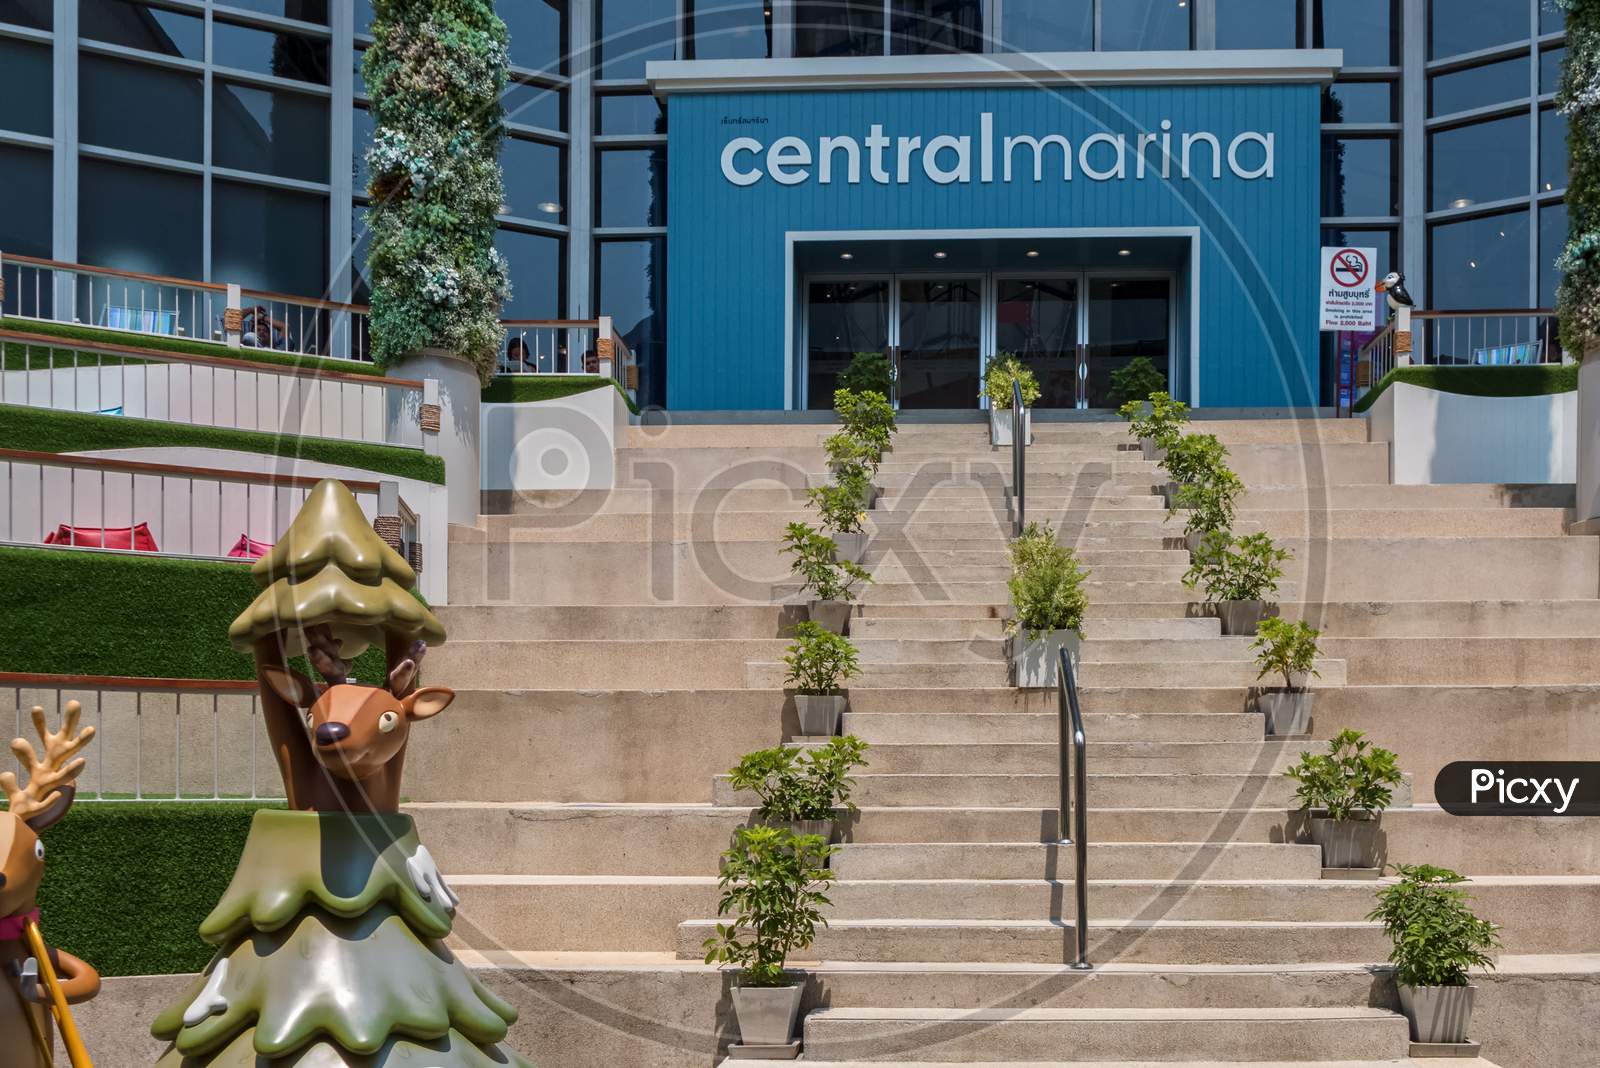 Pattaya,Thailand - April 14,2018: Centralmarina This Is An Entrance To The Shopping Mall,Which Is In Secondroad.The Building Was Renovated In 2016 And The Old Name Is Big C.